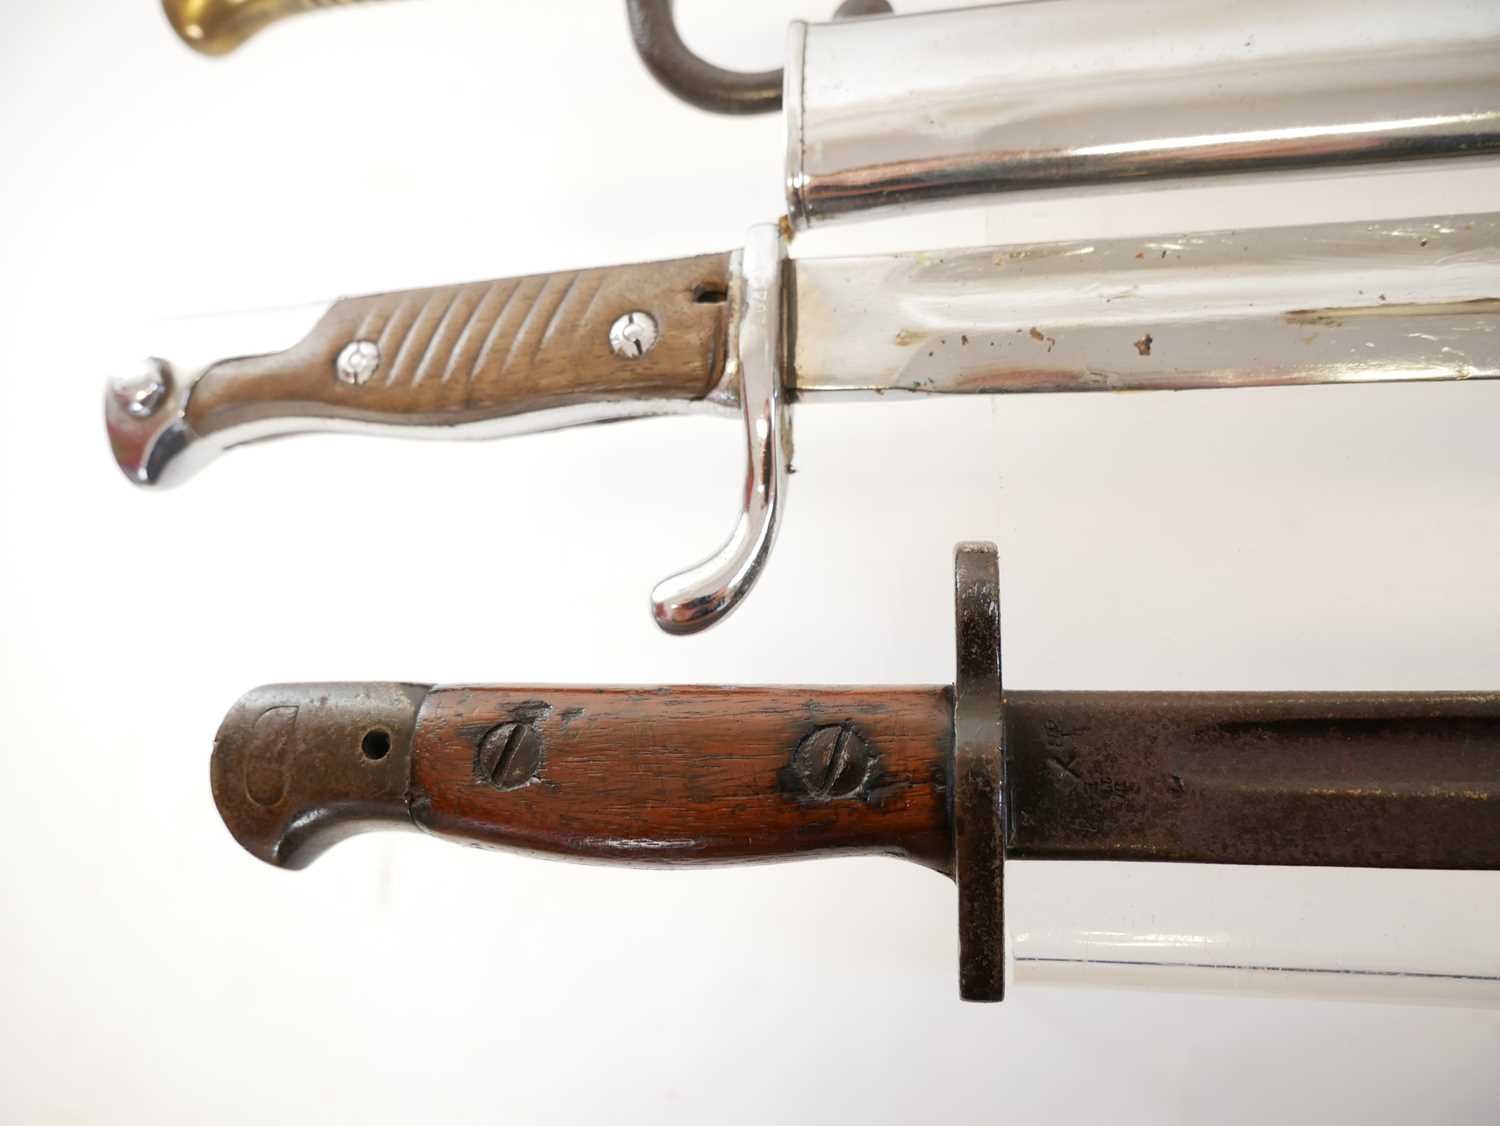 German Mauser S.98 / 05 Butcher Bayonet and scabbard, by Fichel & Sachs Schweinfurt, a Chassepot M. - Image 3 of 11